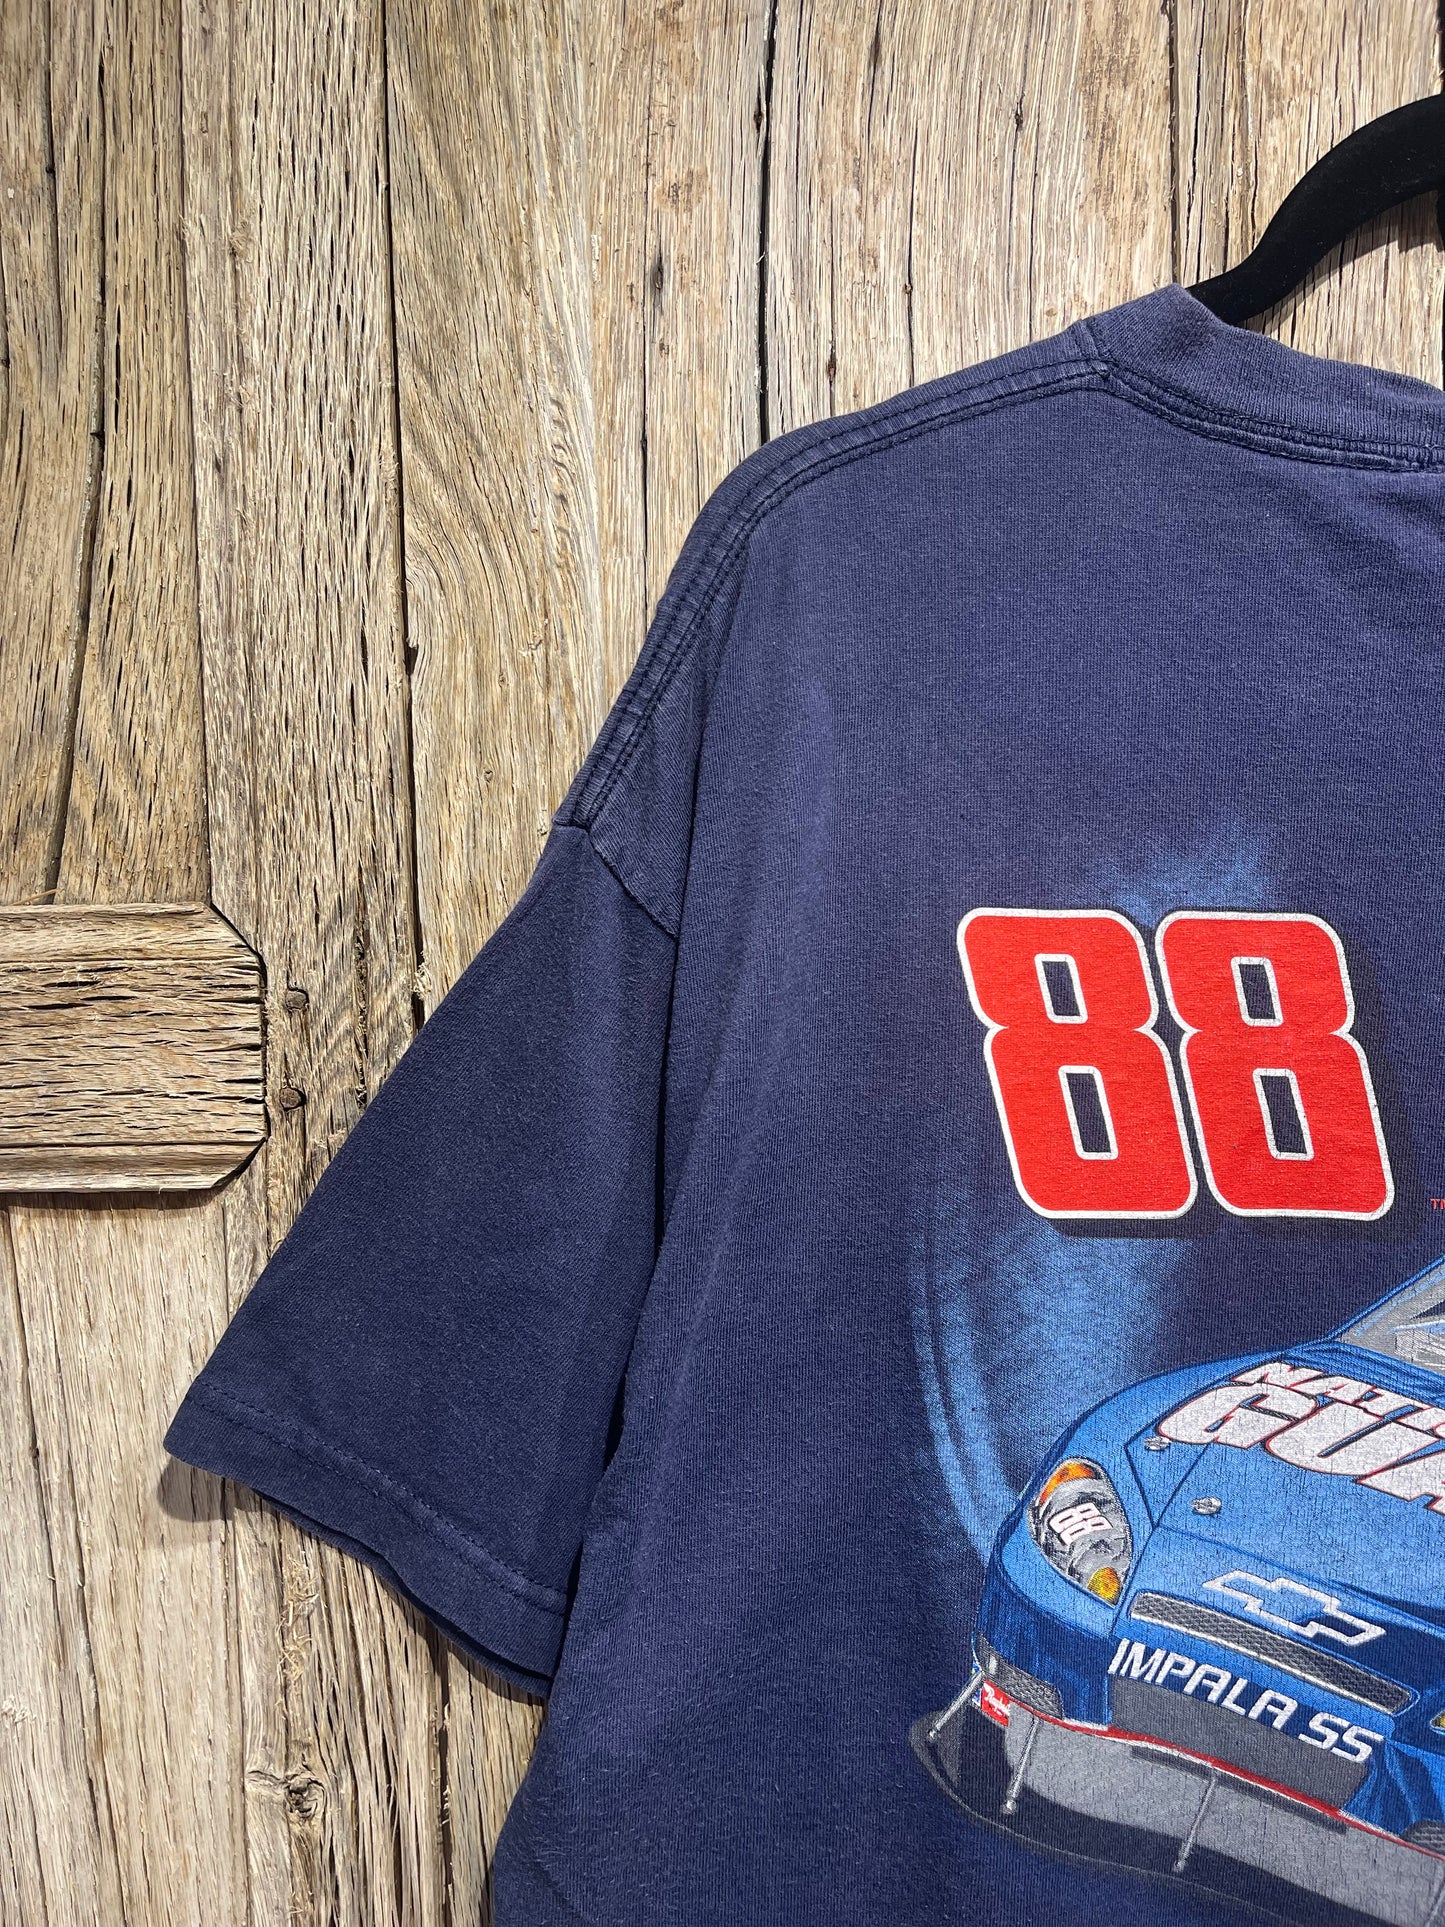 Vintage Blue National Guard Racing Graphic Tee